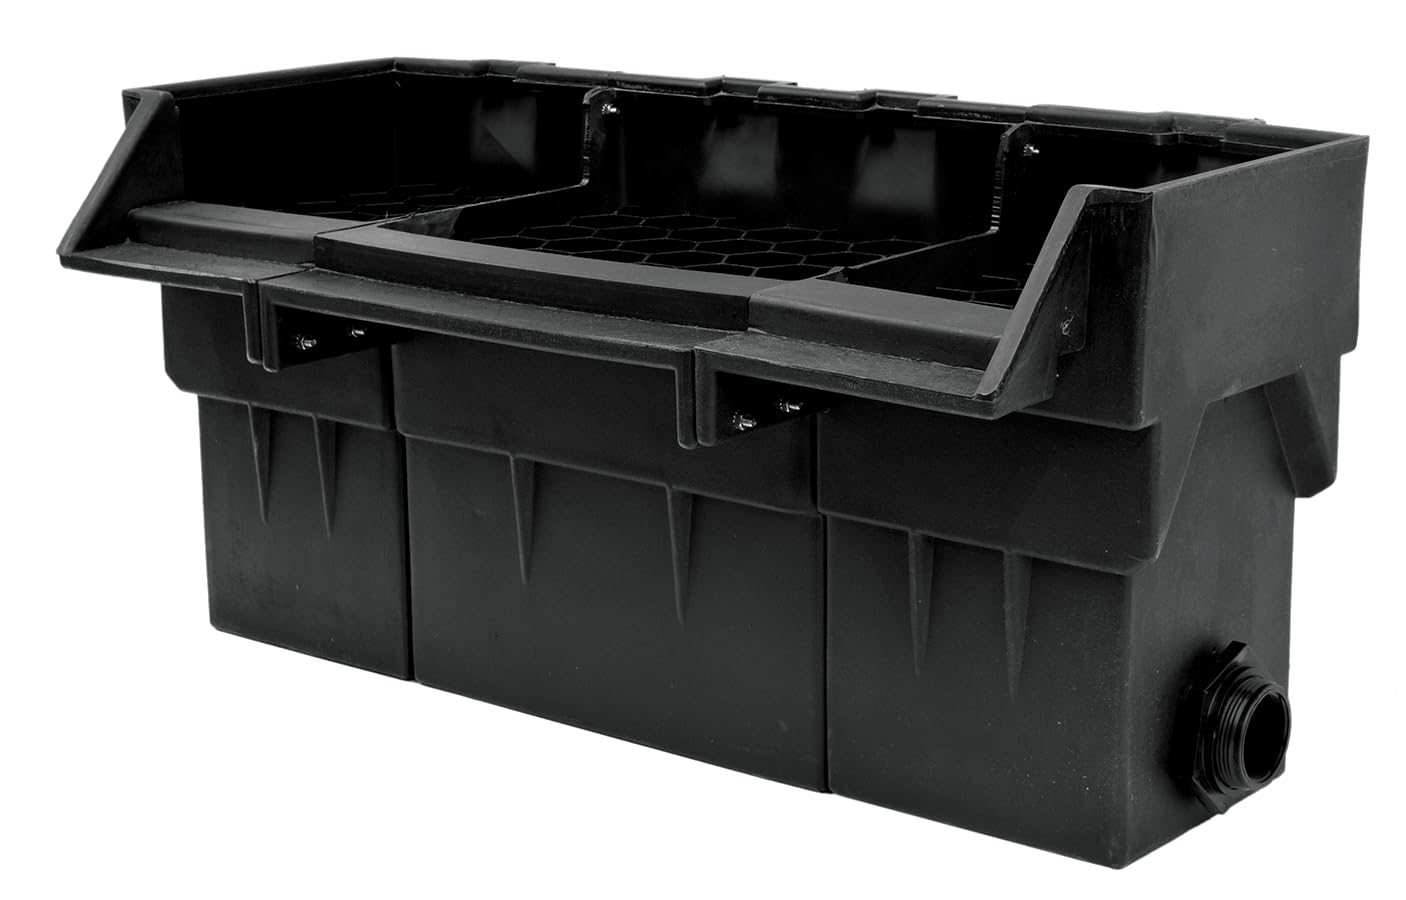 EasyPro Pond Products Pro-Series EWS34-34” Straight Waterfall Spillway - Designed to Sit Inside The Liner Eliminating Leaks. Has The Ability to be Connected to Other Spillways to Expand The Spillway